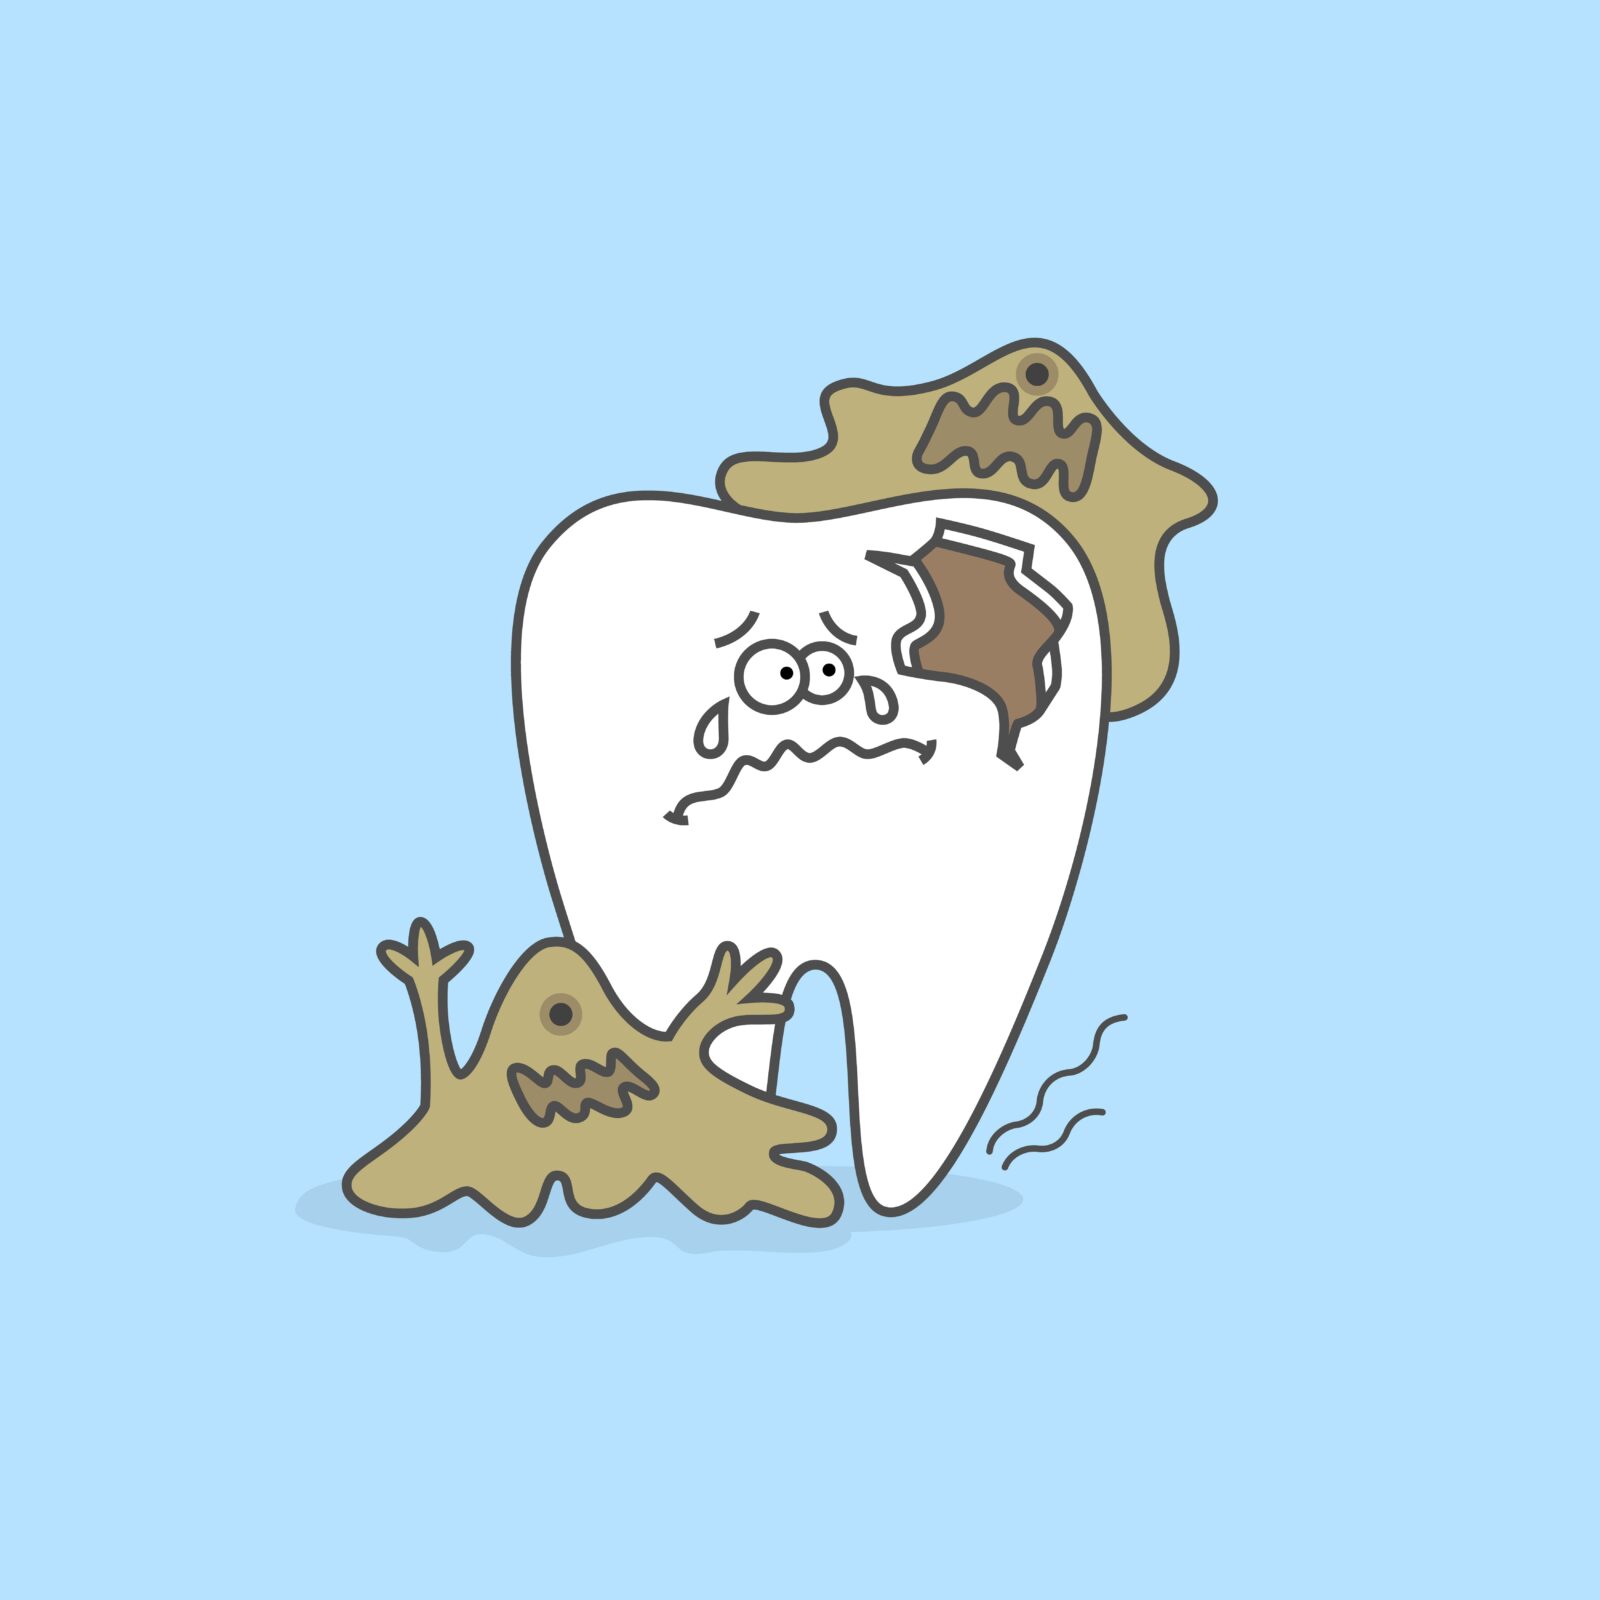 sad tooth cartoon being eaten by bacteria